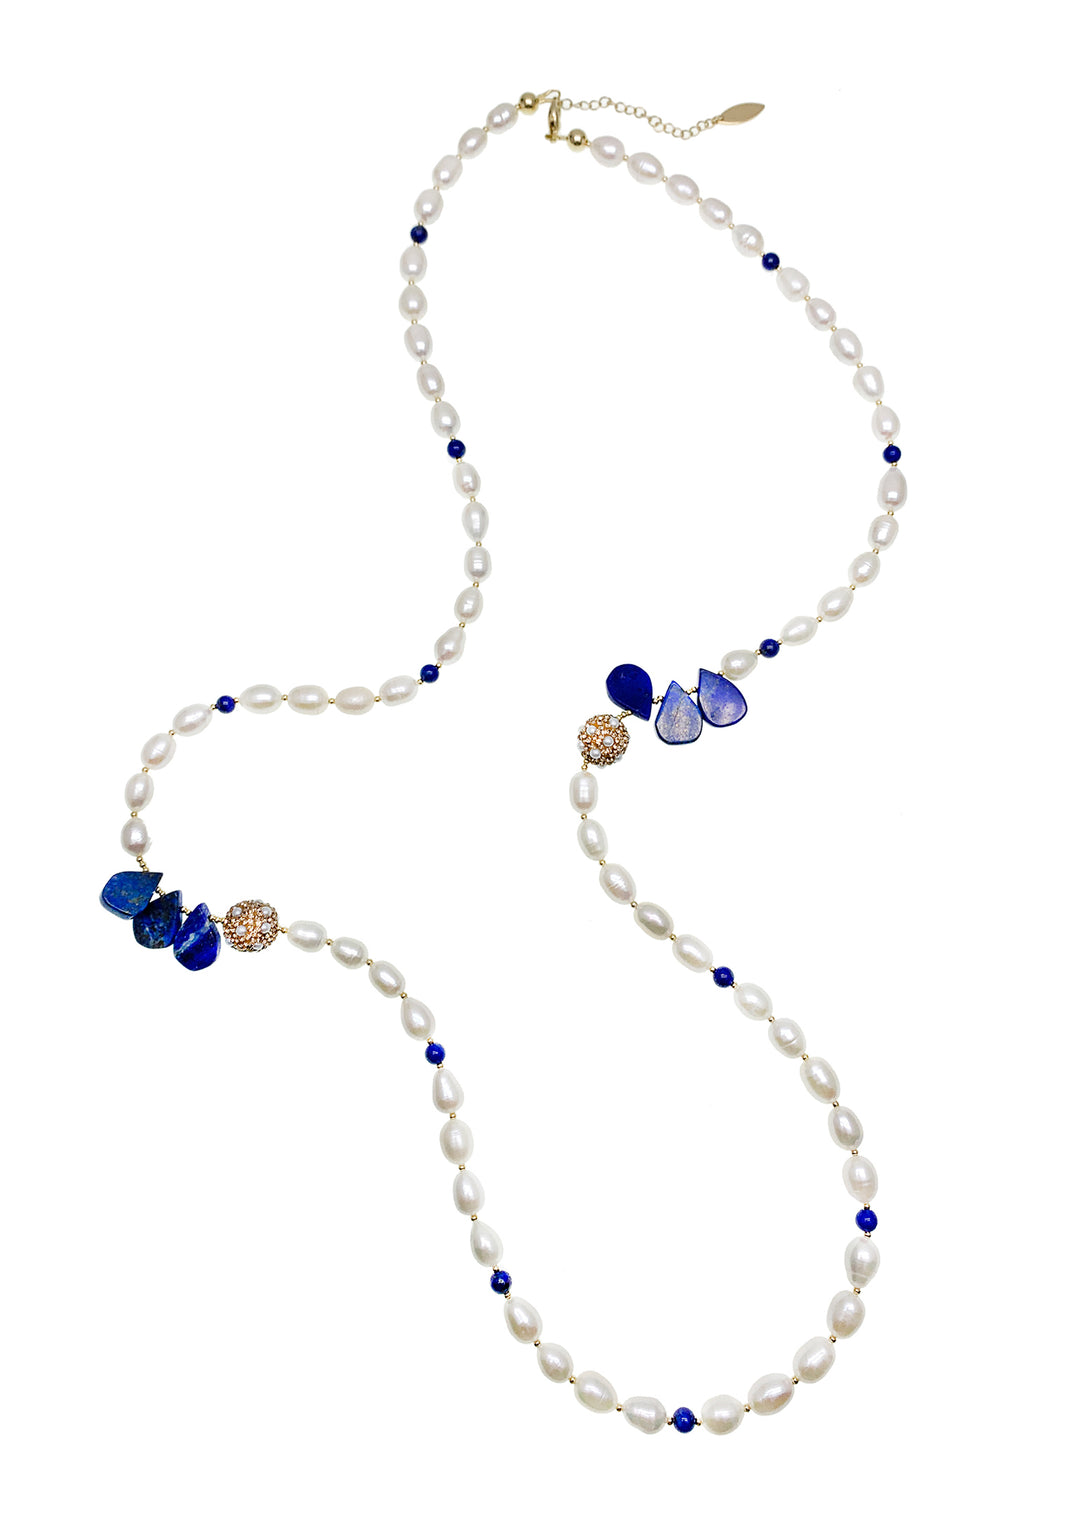 Freshwater Pearls With Lapis & Rhinestones Multi-Way Necklace GN019 - FARRA